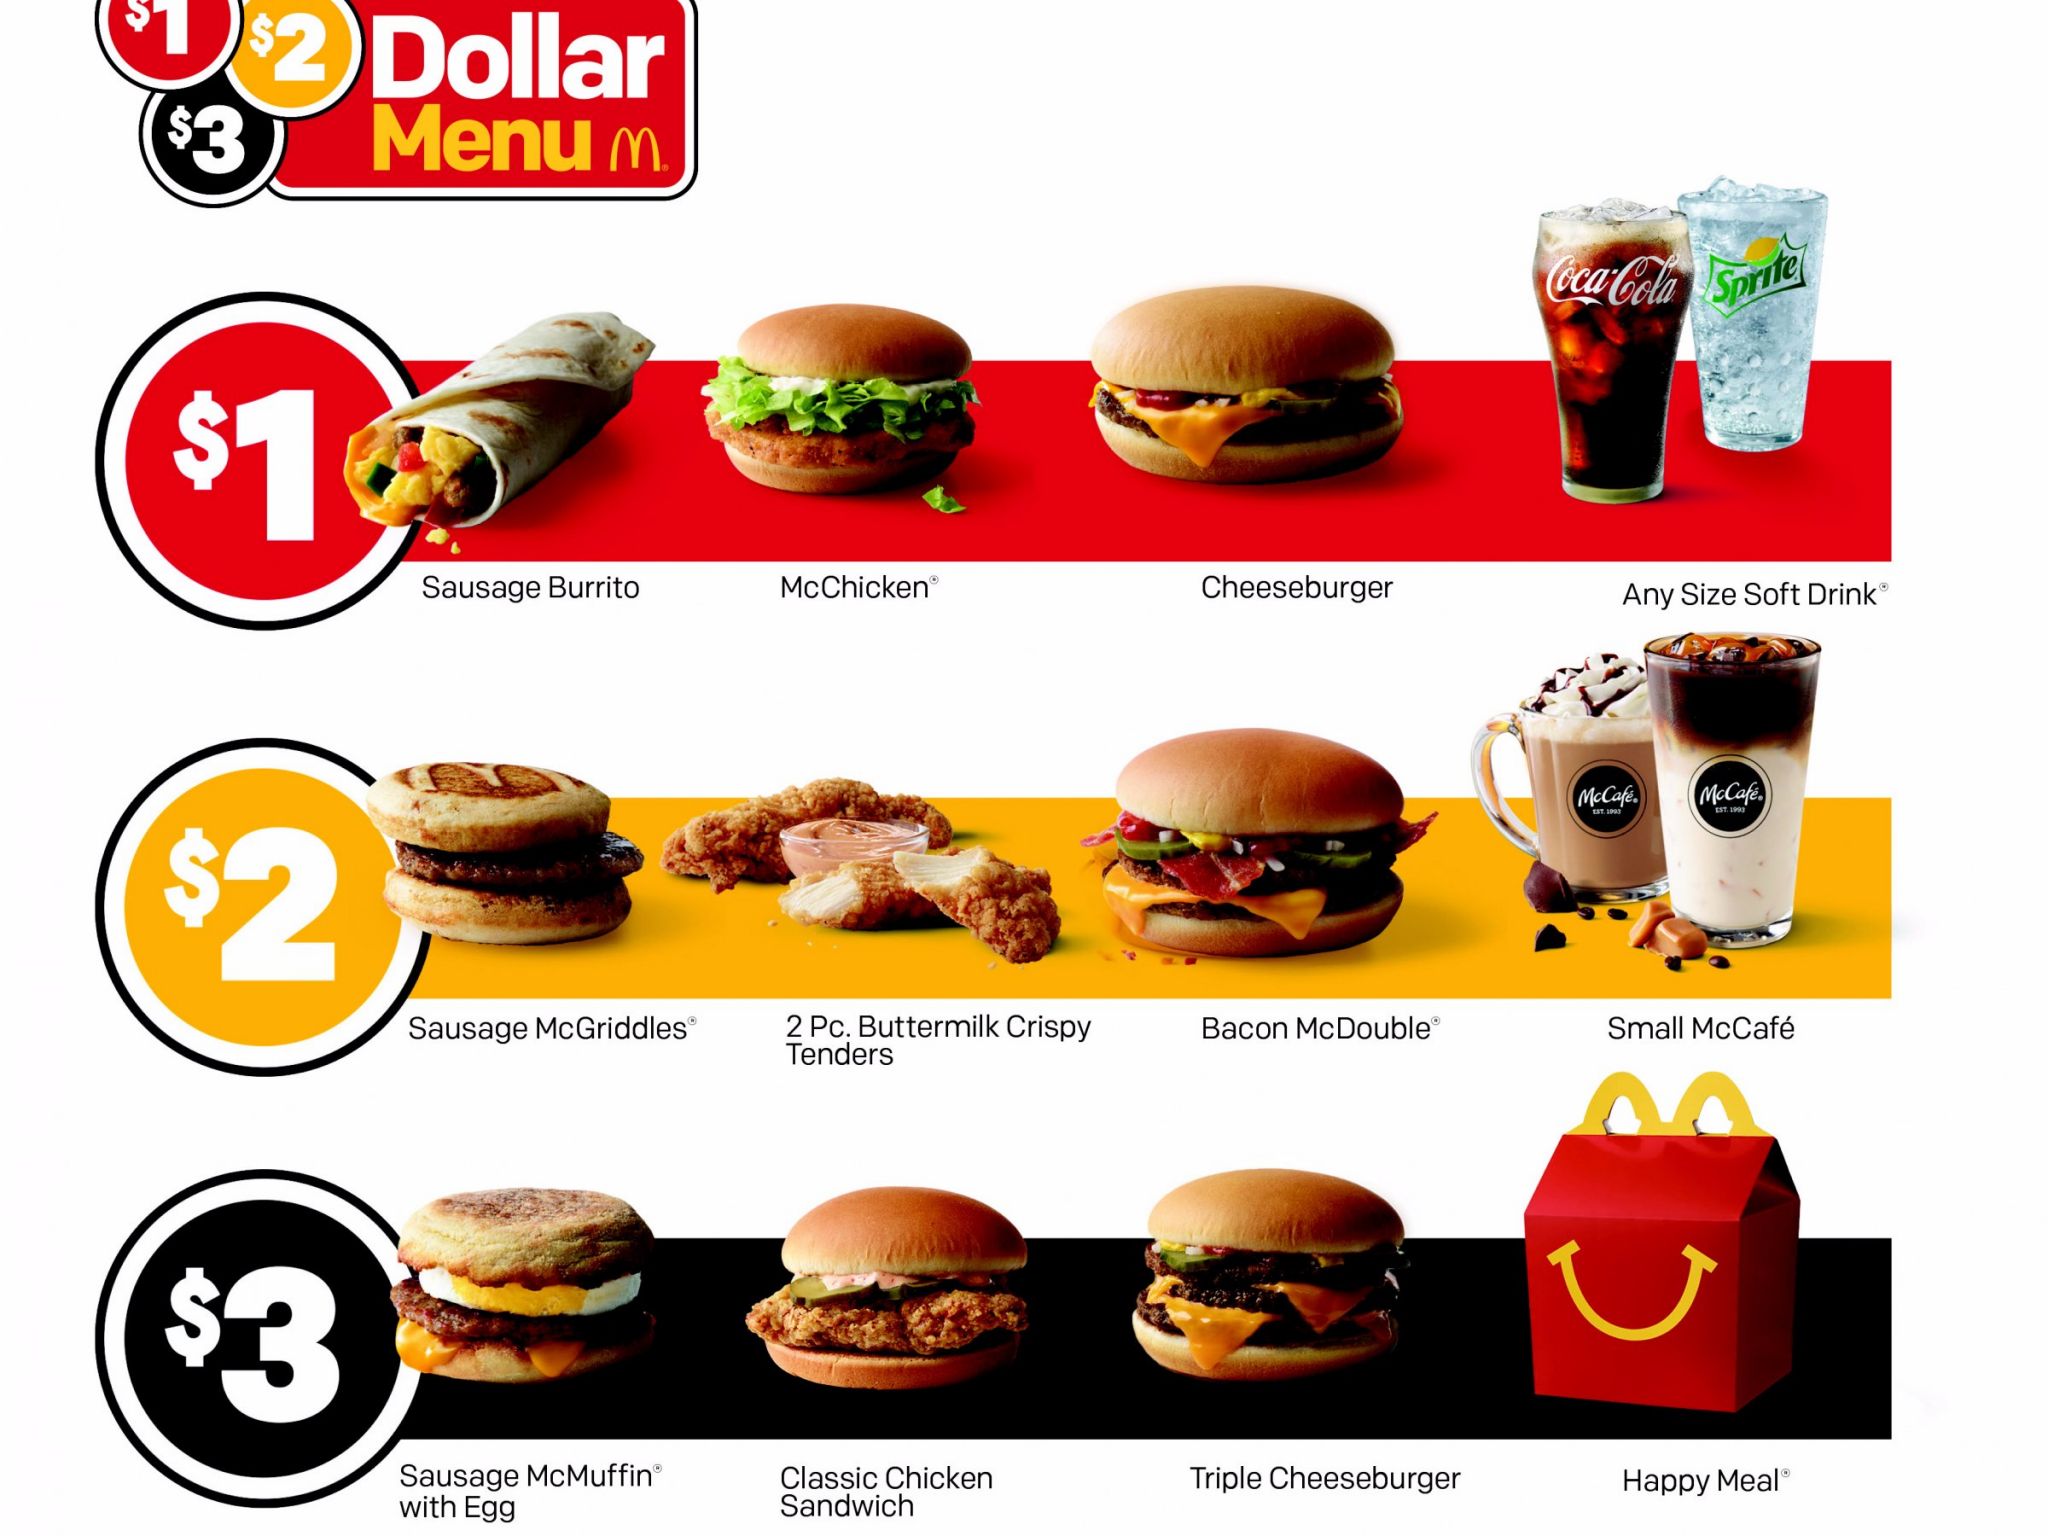 McDonald's Dollar Menu is back — here's what's on it SFGate